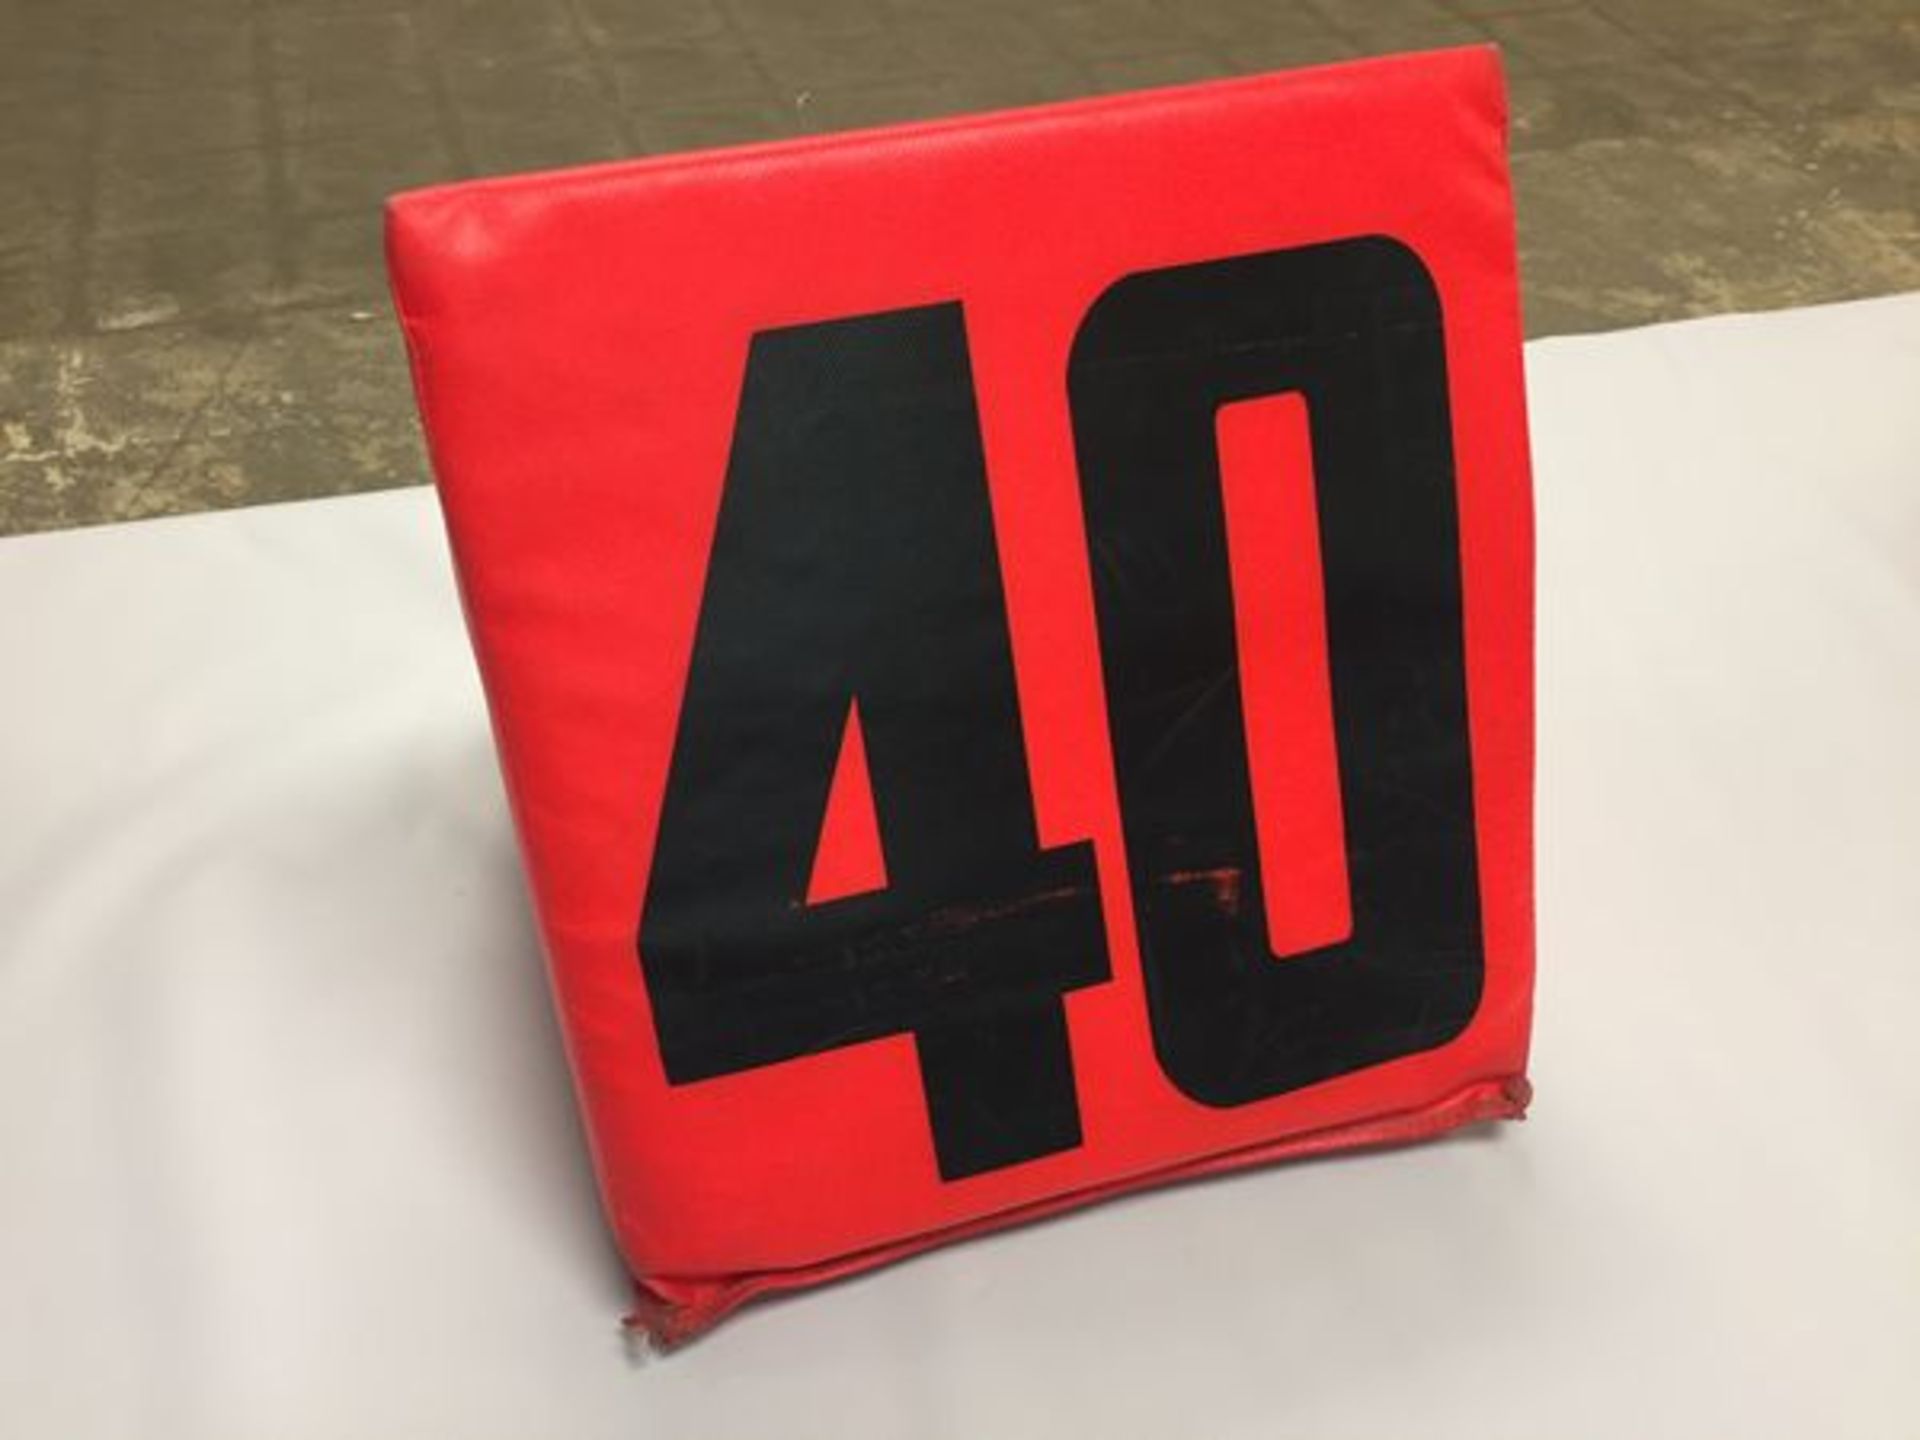 40 yard"" Sideline Marker / Game-Used / This item includes Georgia Dome Authentication Tag